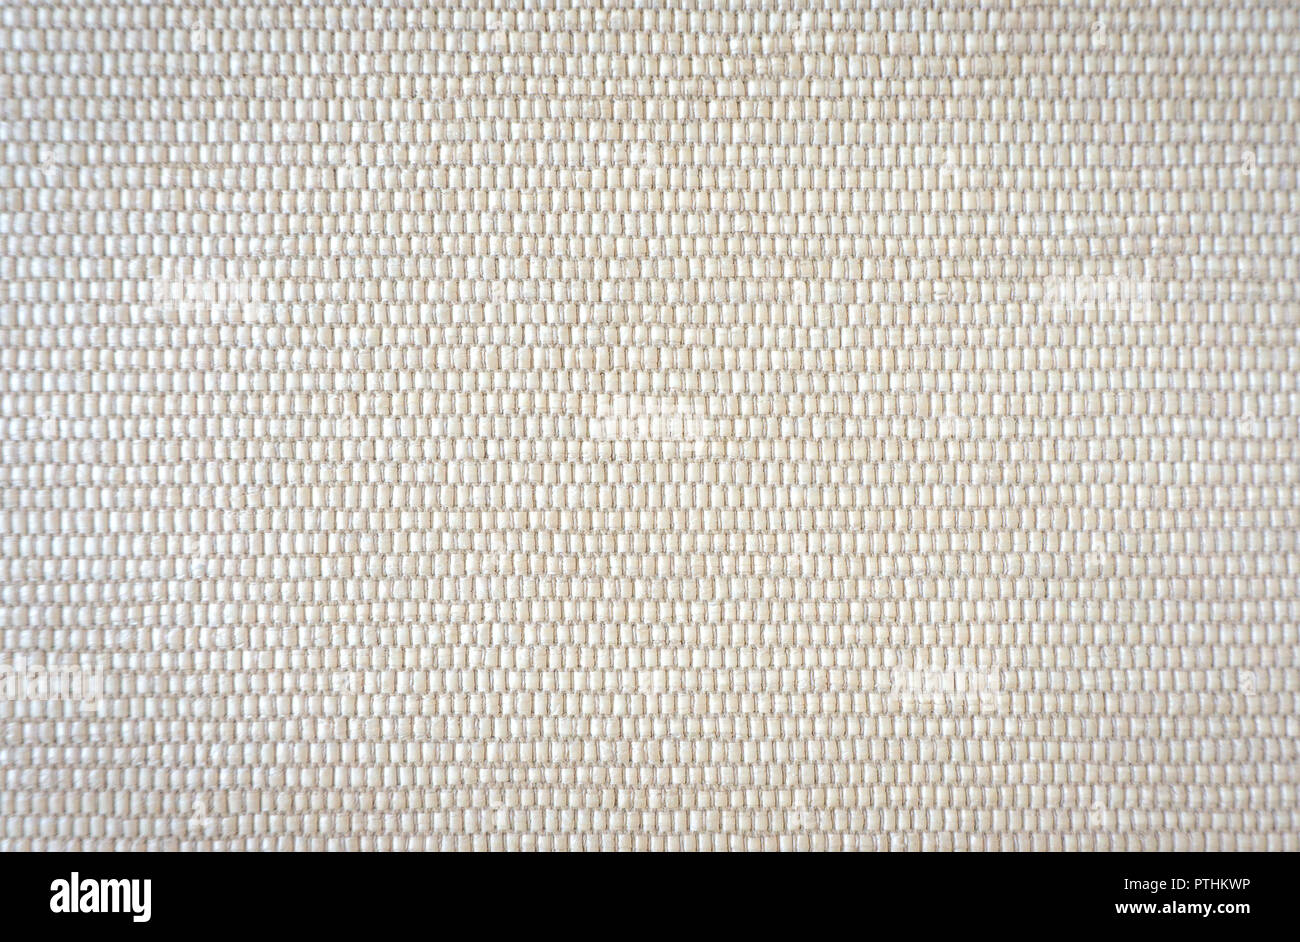 Natural white knit fabric background made for chair. Stock Photo